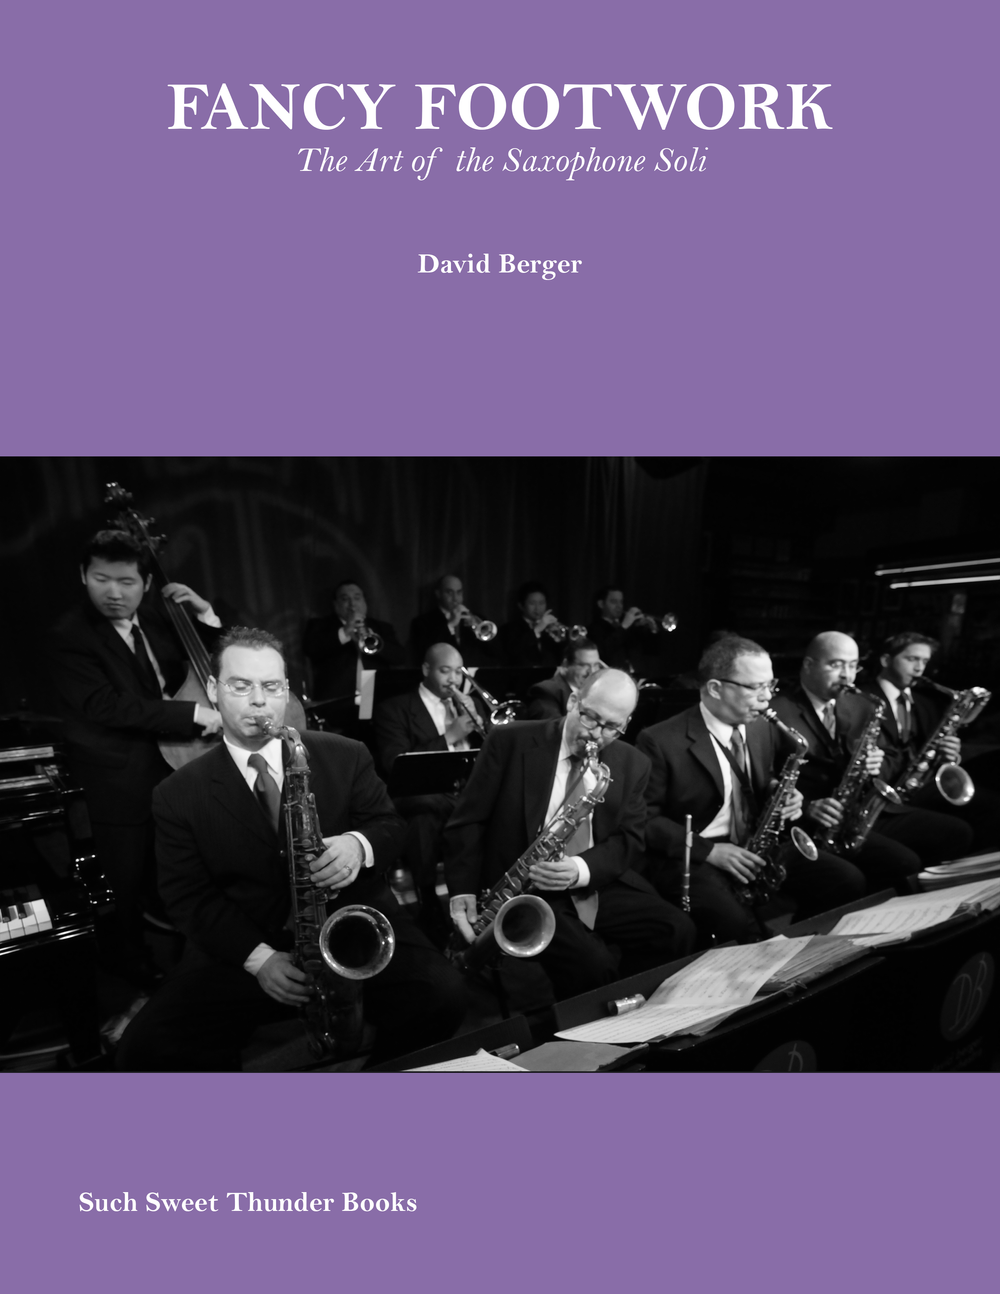 Fancy footwork - The Art of the Saxophone Soli book cover